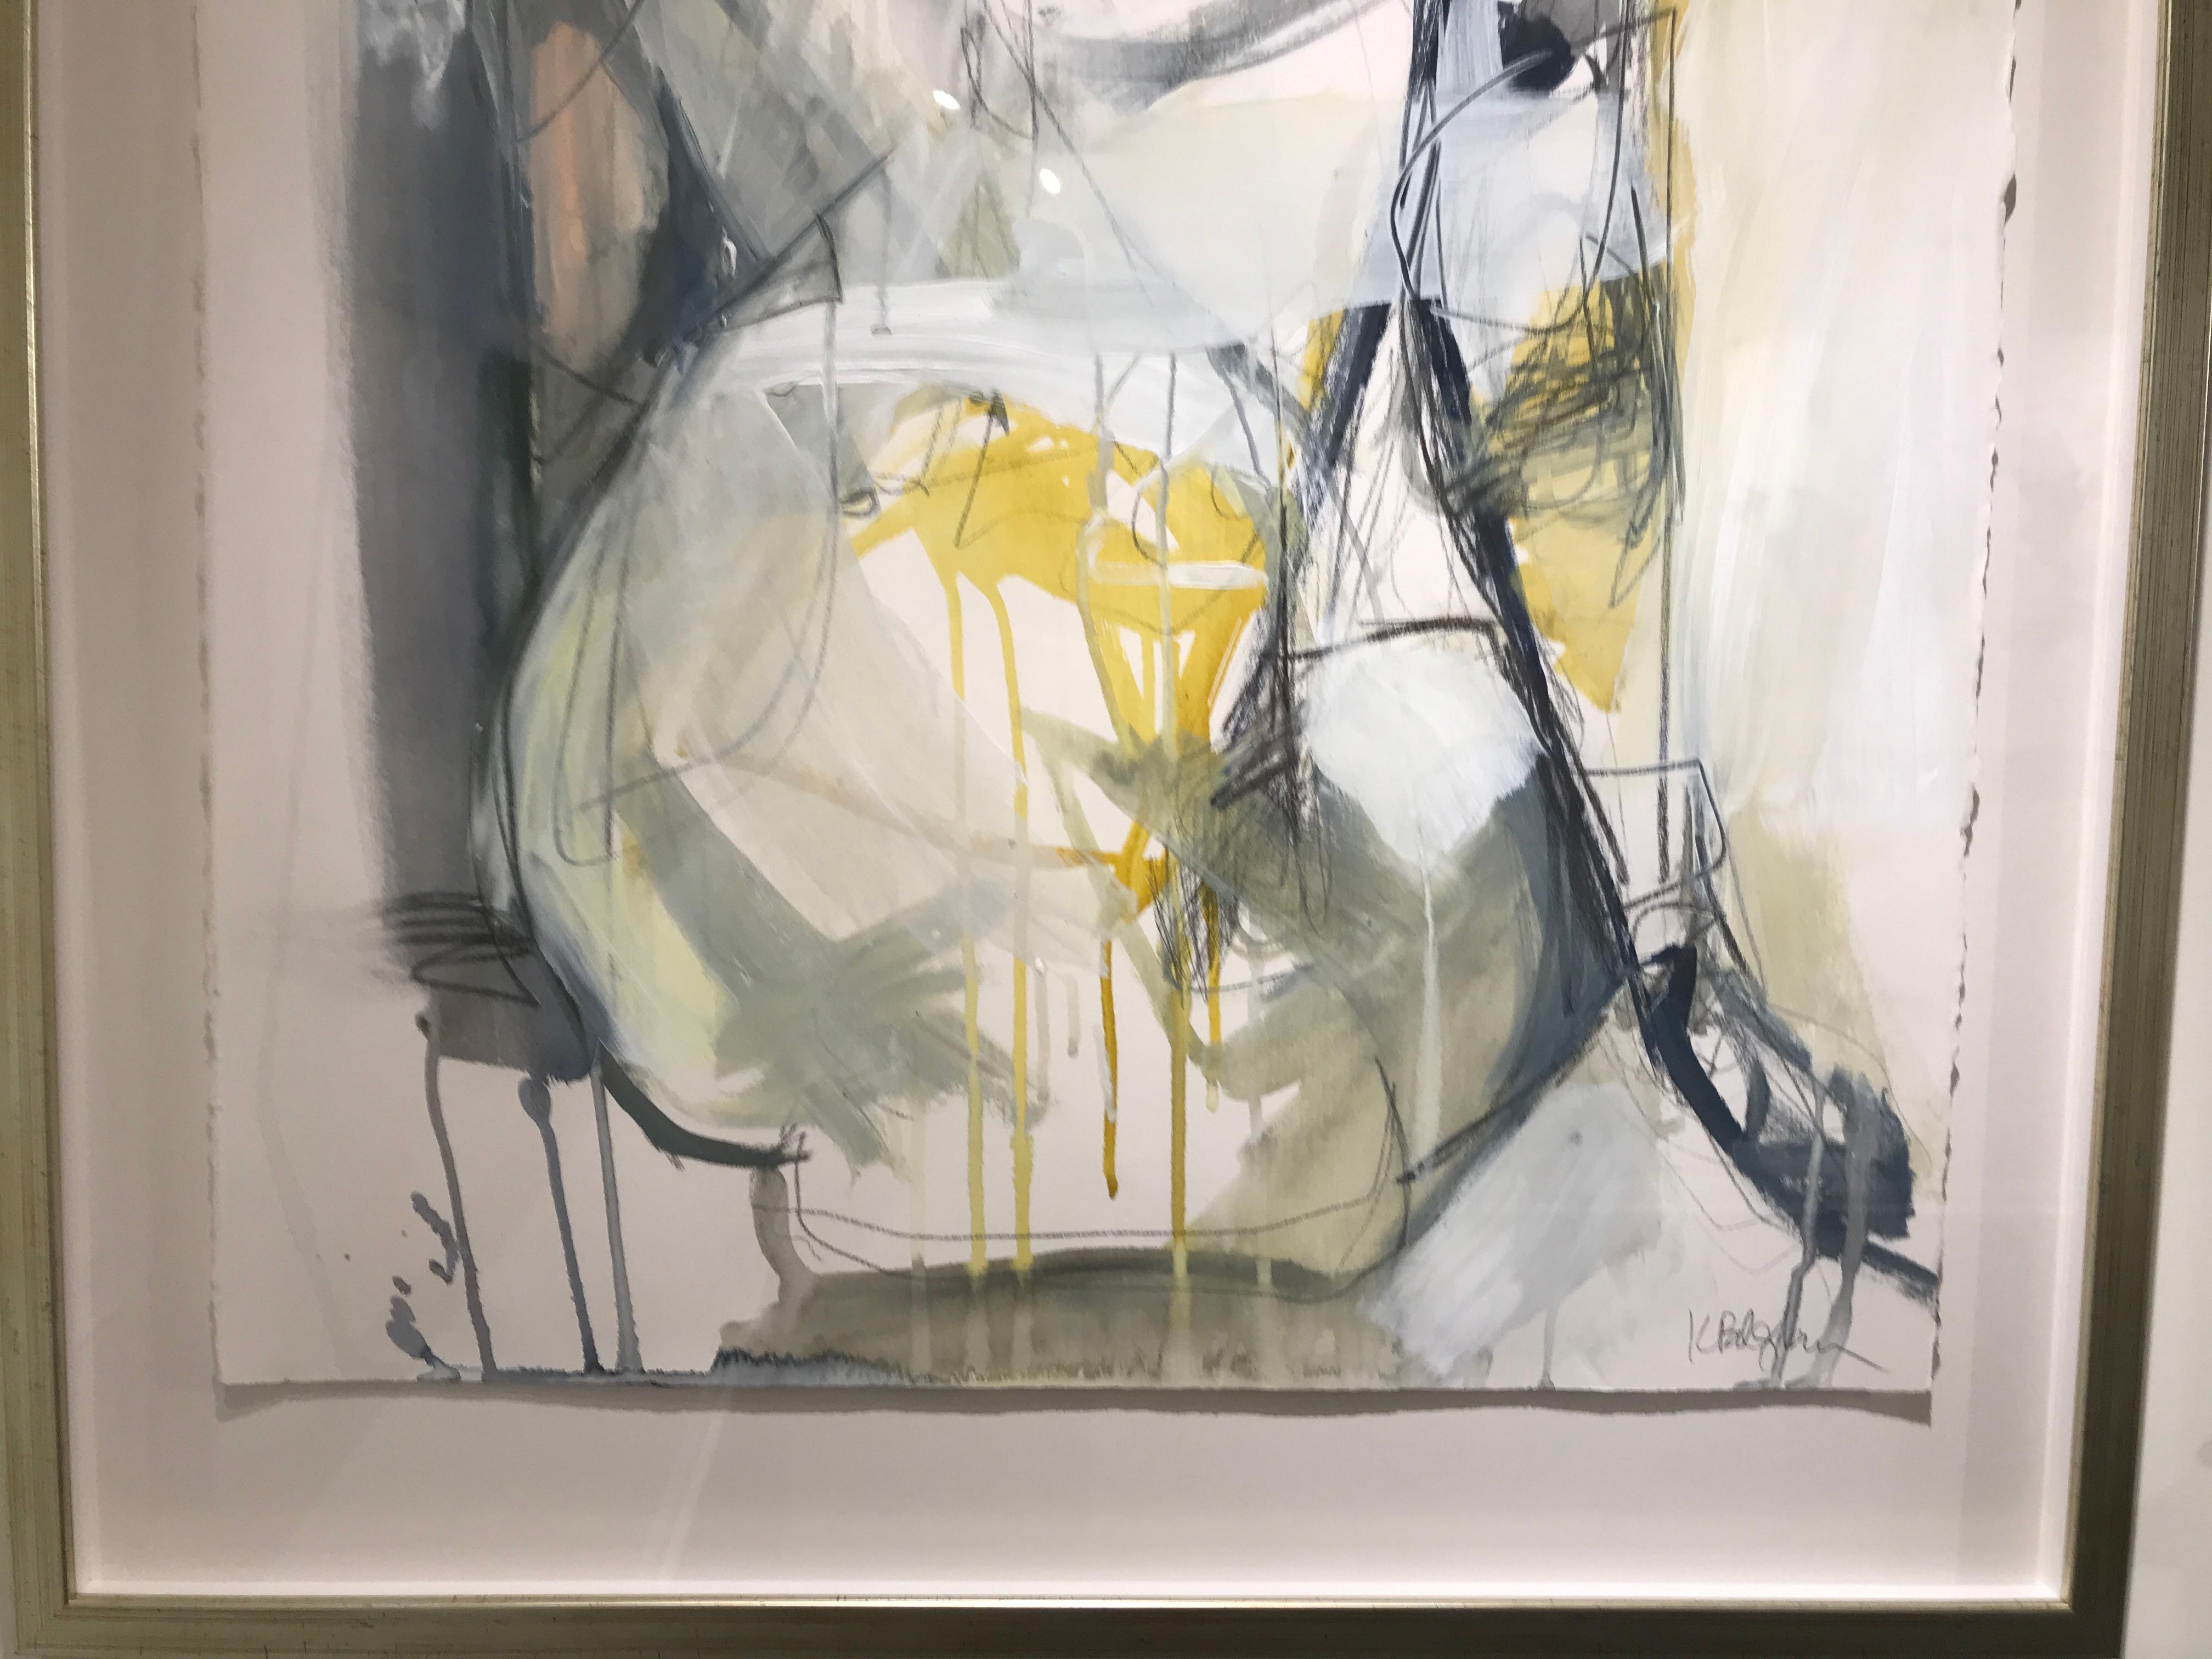 Presence by Kelley Ogburn, Framed Vertical Abstract Mixed Media on Paper Piece 1